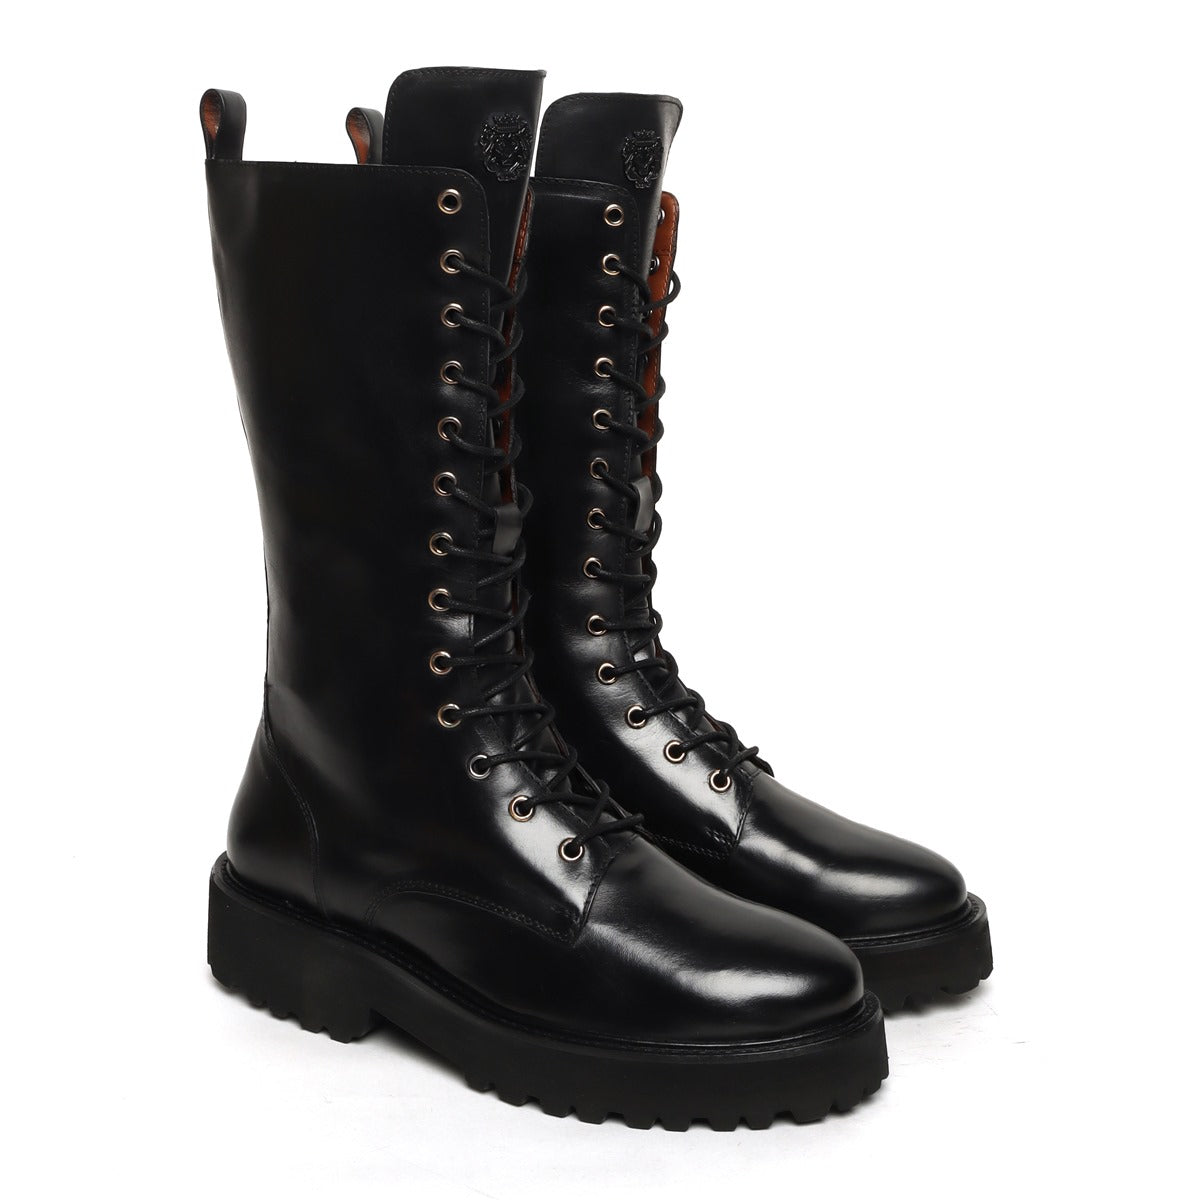 Black Ladies Leather Boot with Lace-Up Closure Metal Lion